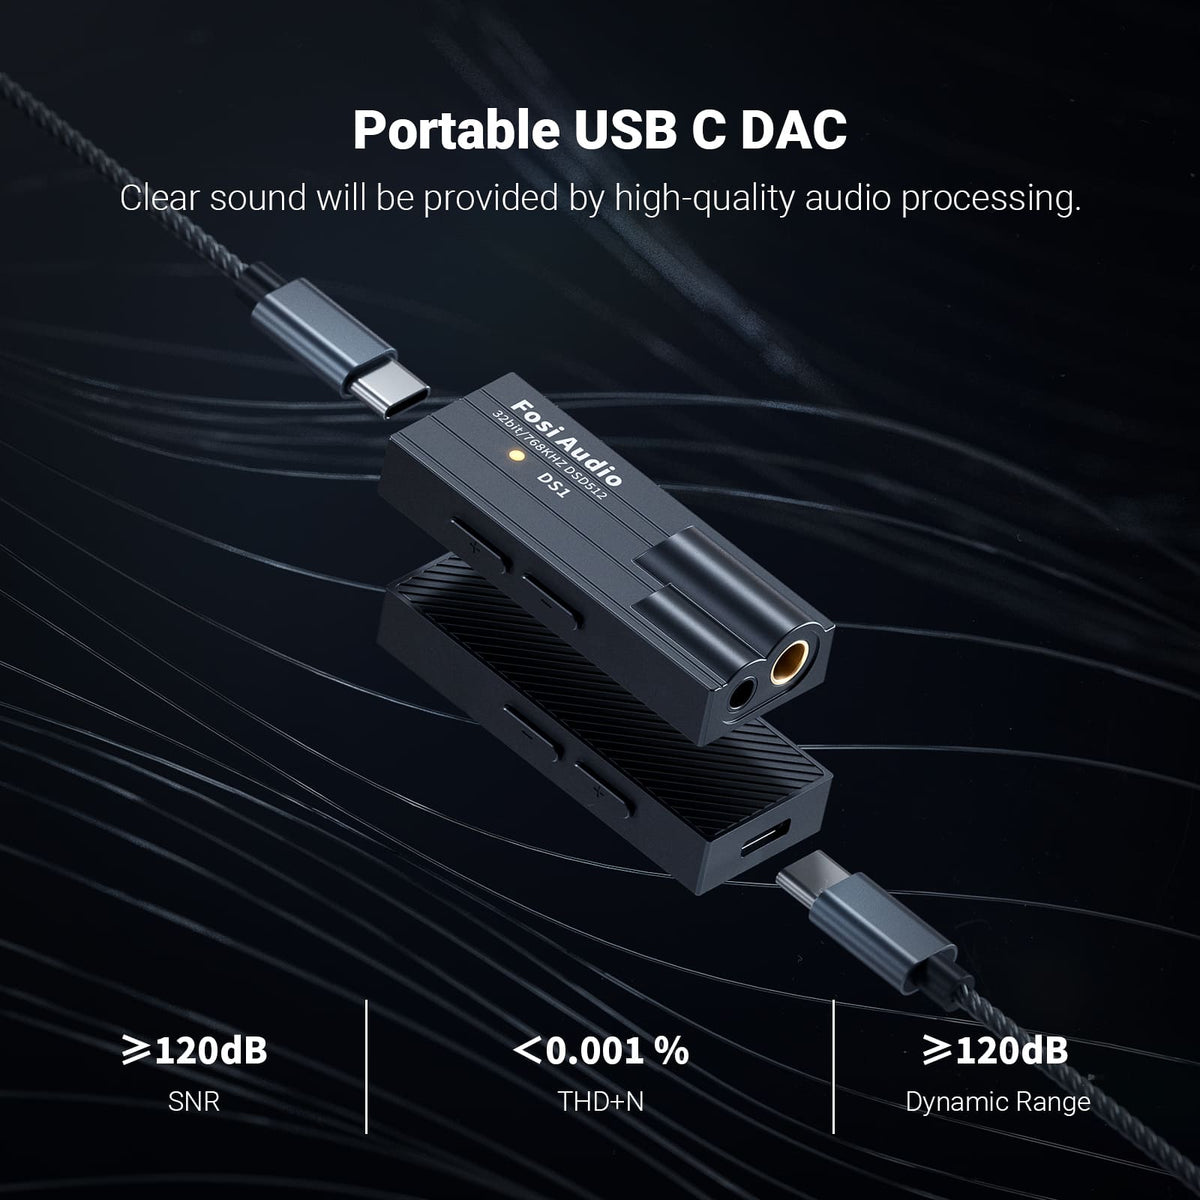 Fosi audio DS1 Dongle-DAC/Amplifier  Headphone Reviews and Discussion 